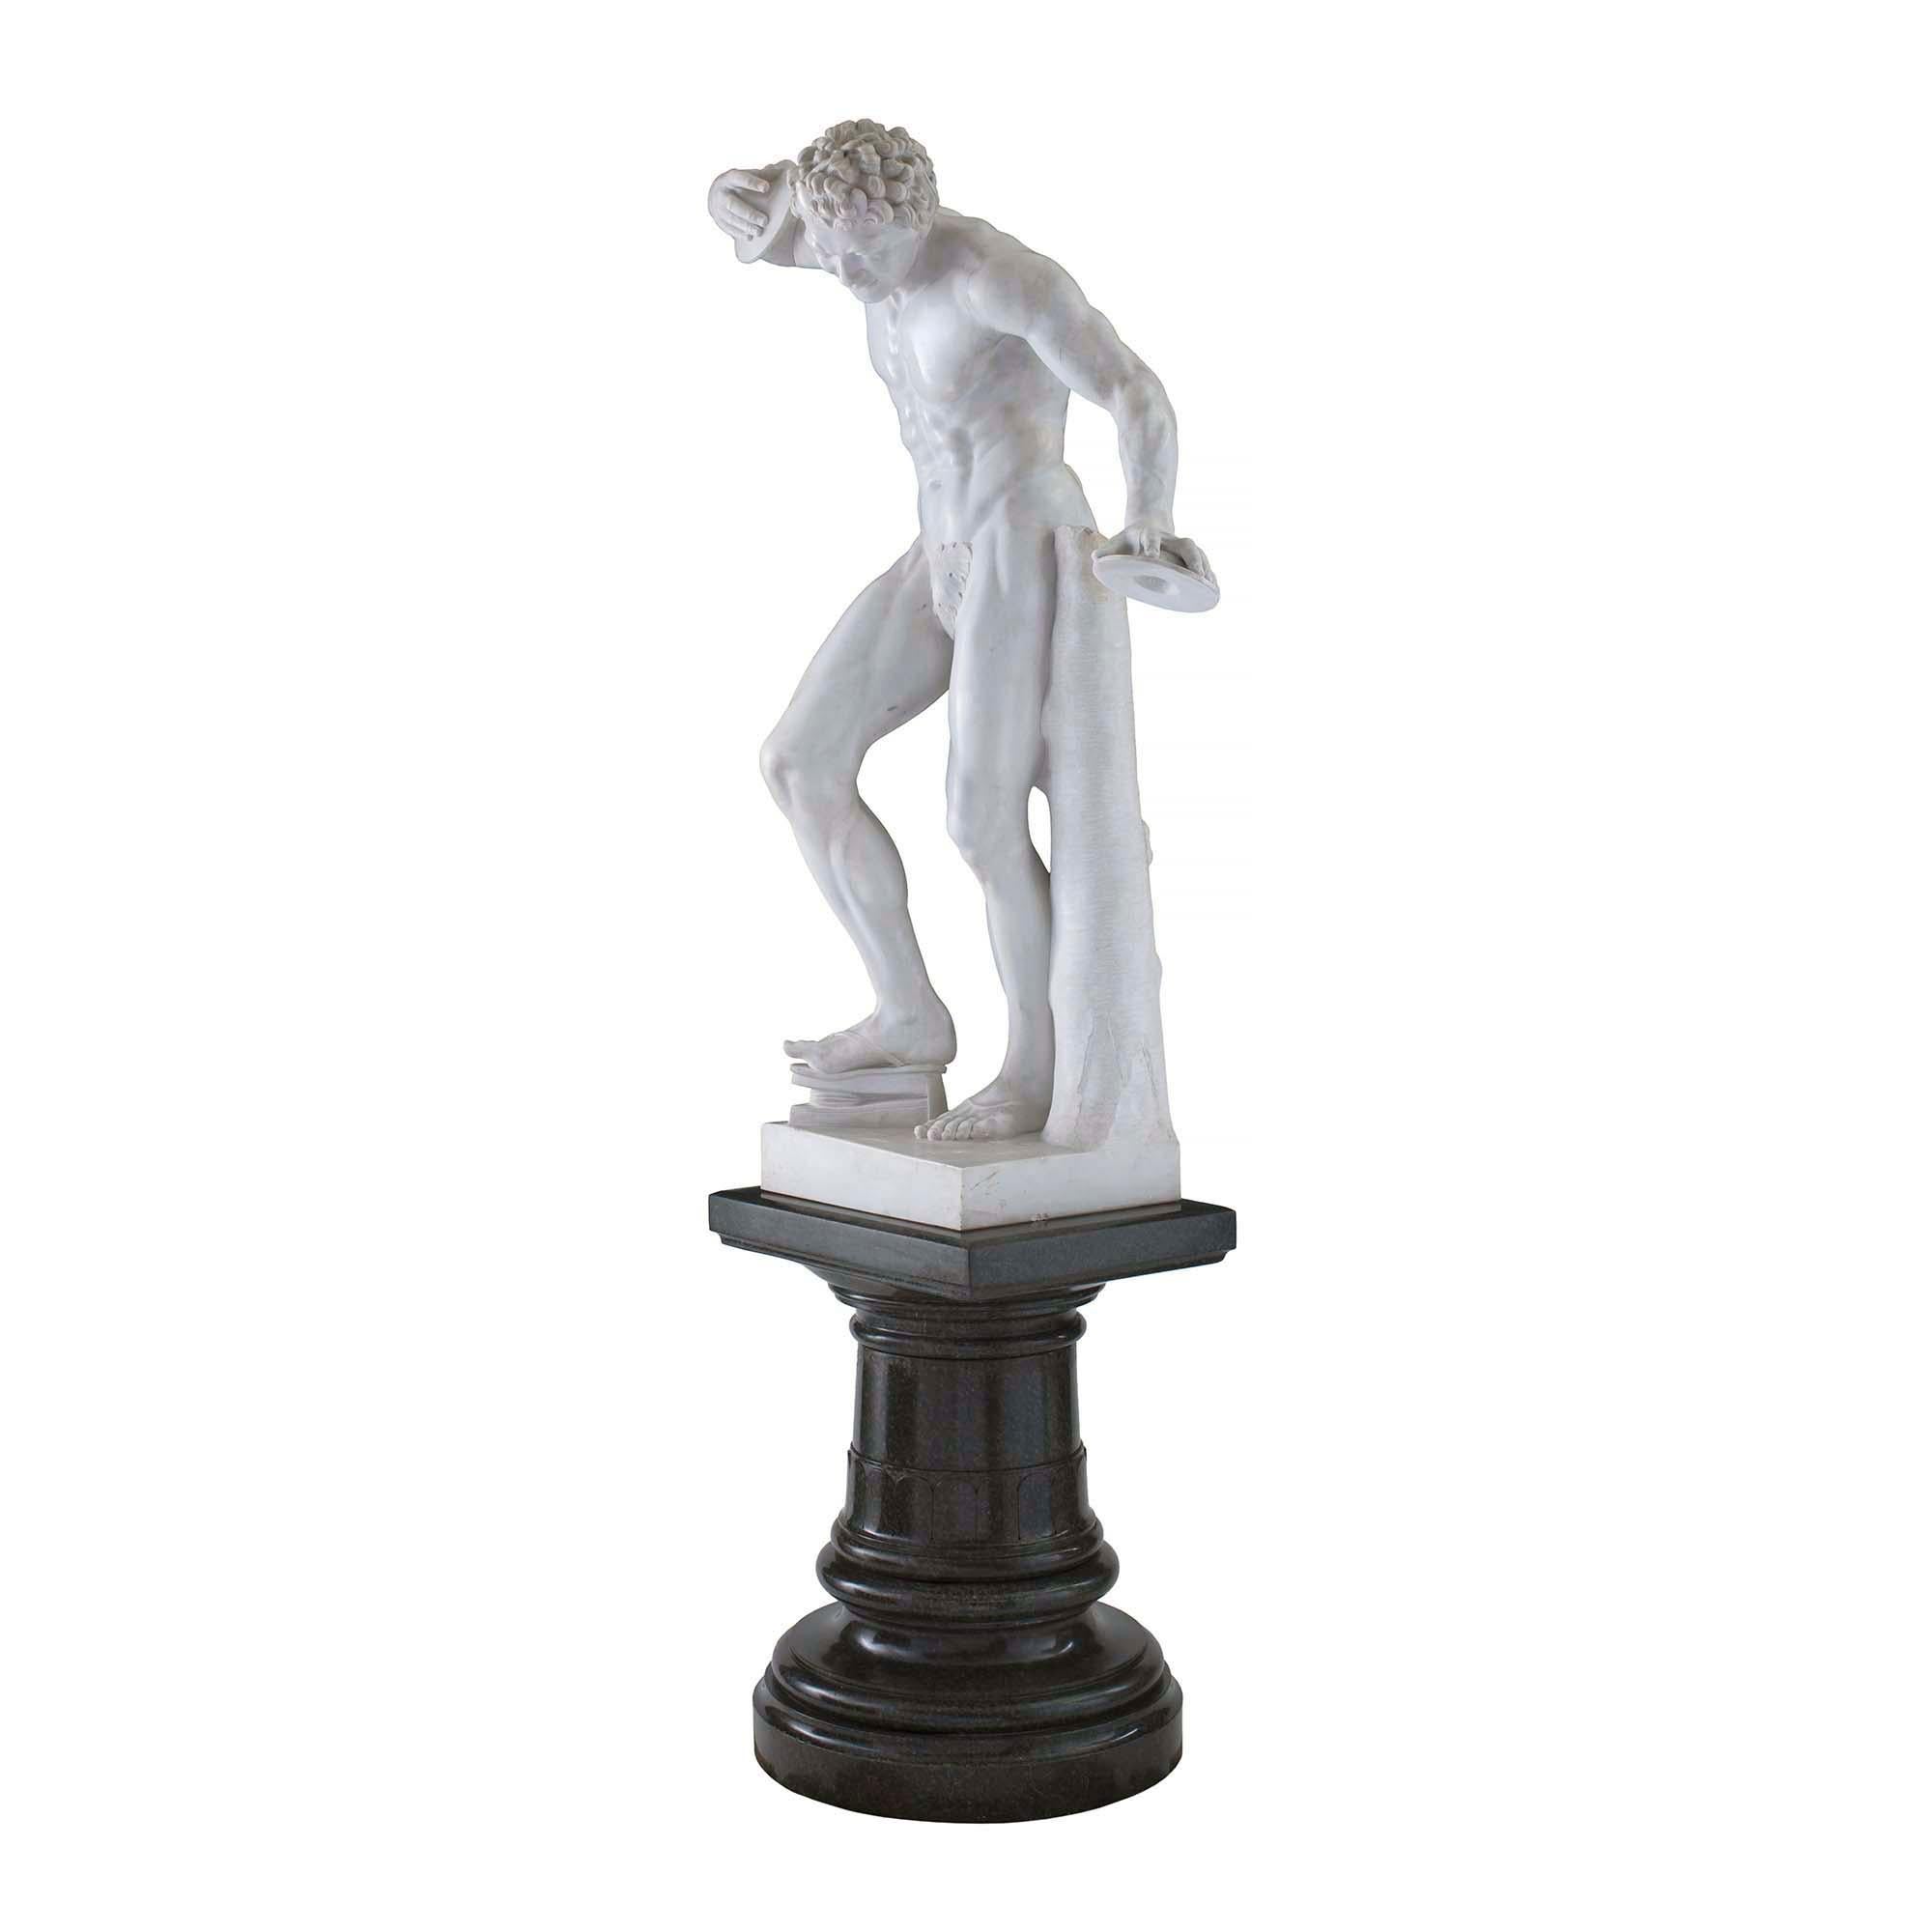 Italian 19th Century Neoclassical Style Marble Statue of a Faun with Cymbals For Sale 1